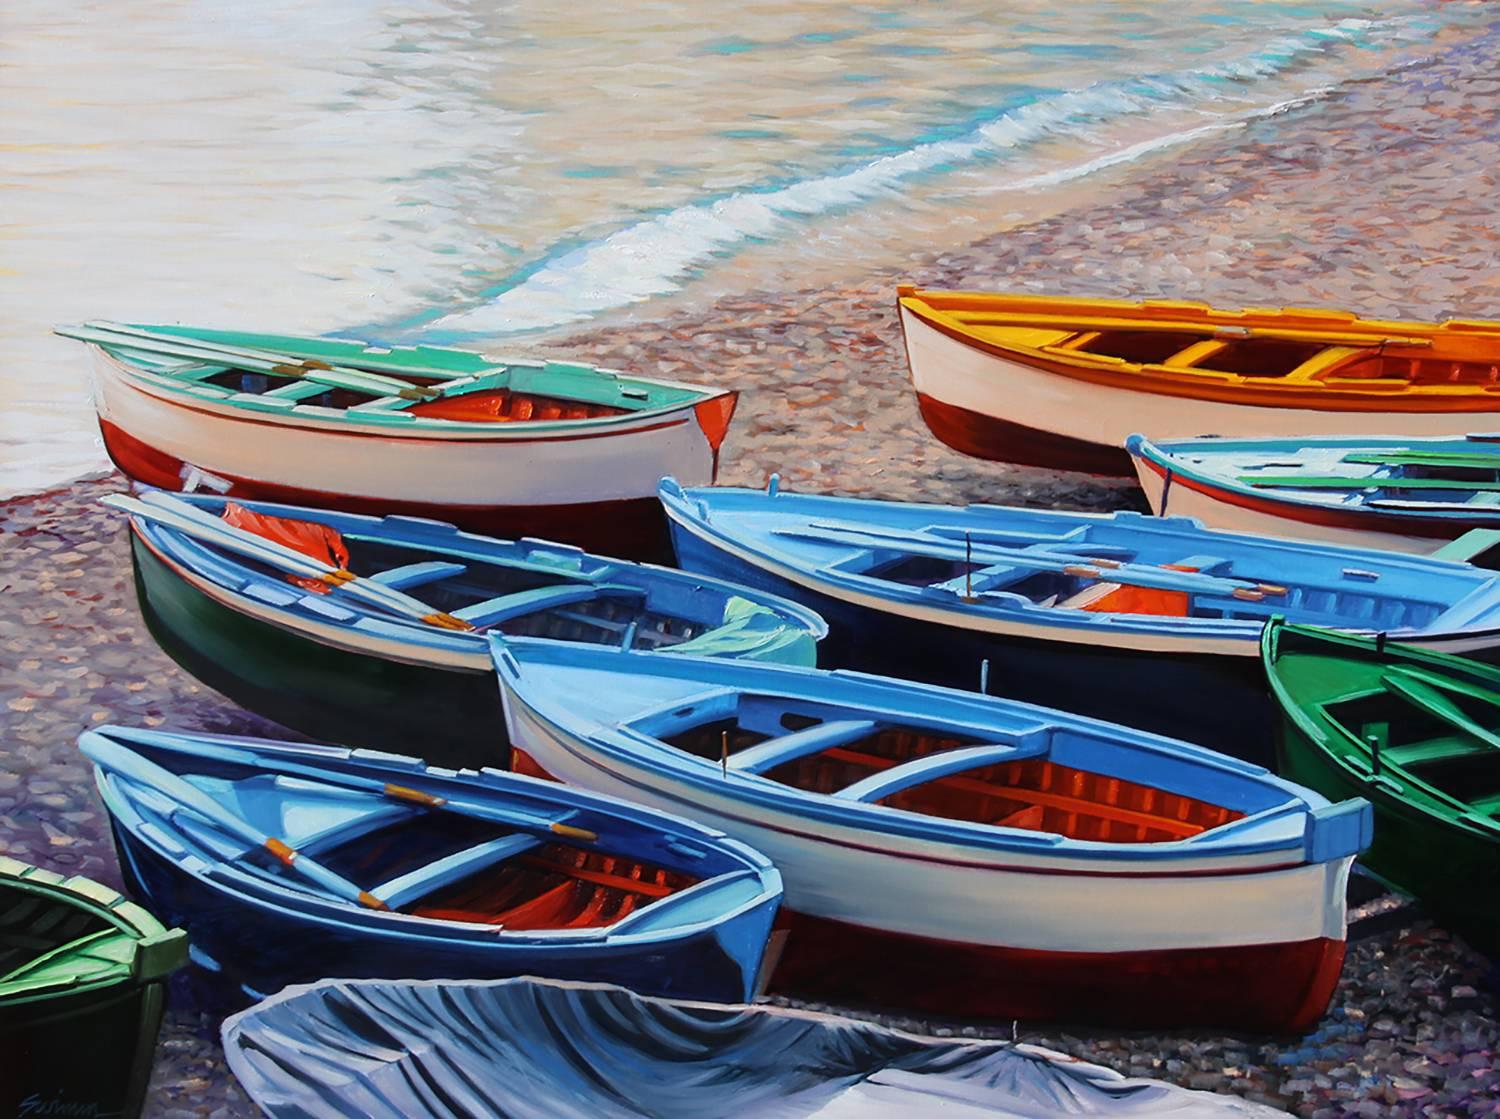 A stunning example of Tom Swimm's enhanced realism, this large oil painting of colorful fishing boats on the Amalfi Coast beach features a cornucopia of color, and is accurately titled "Rainbow of Boats." This brilliant image of Southern Italy